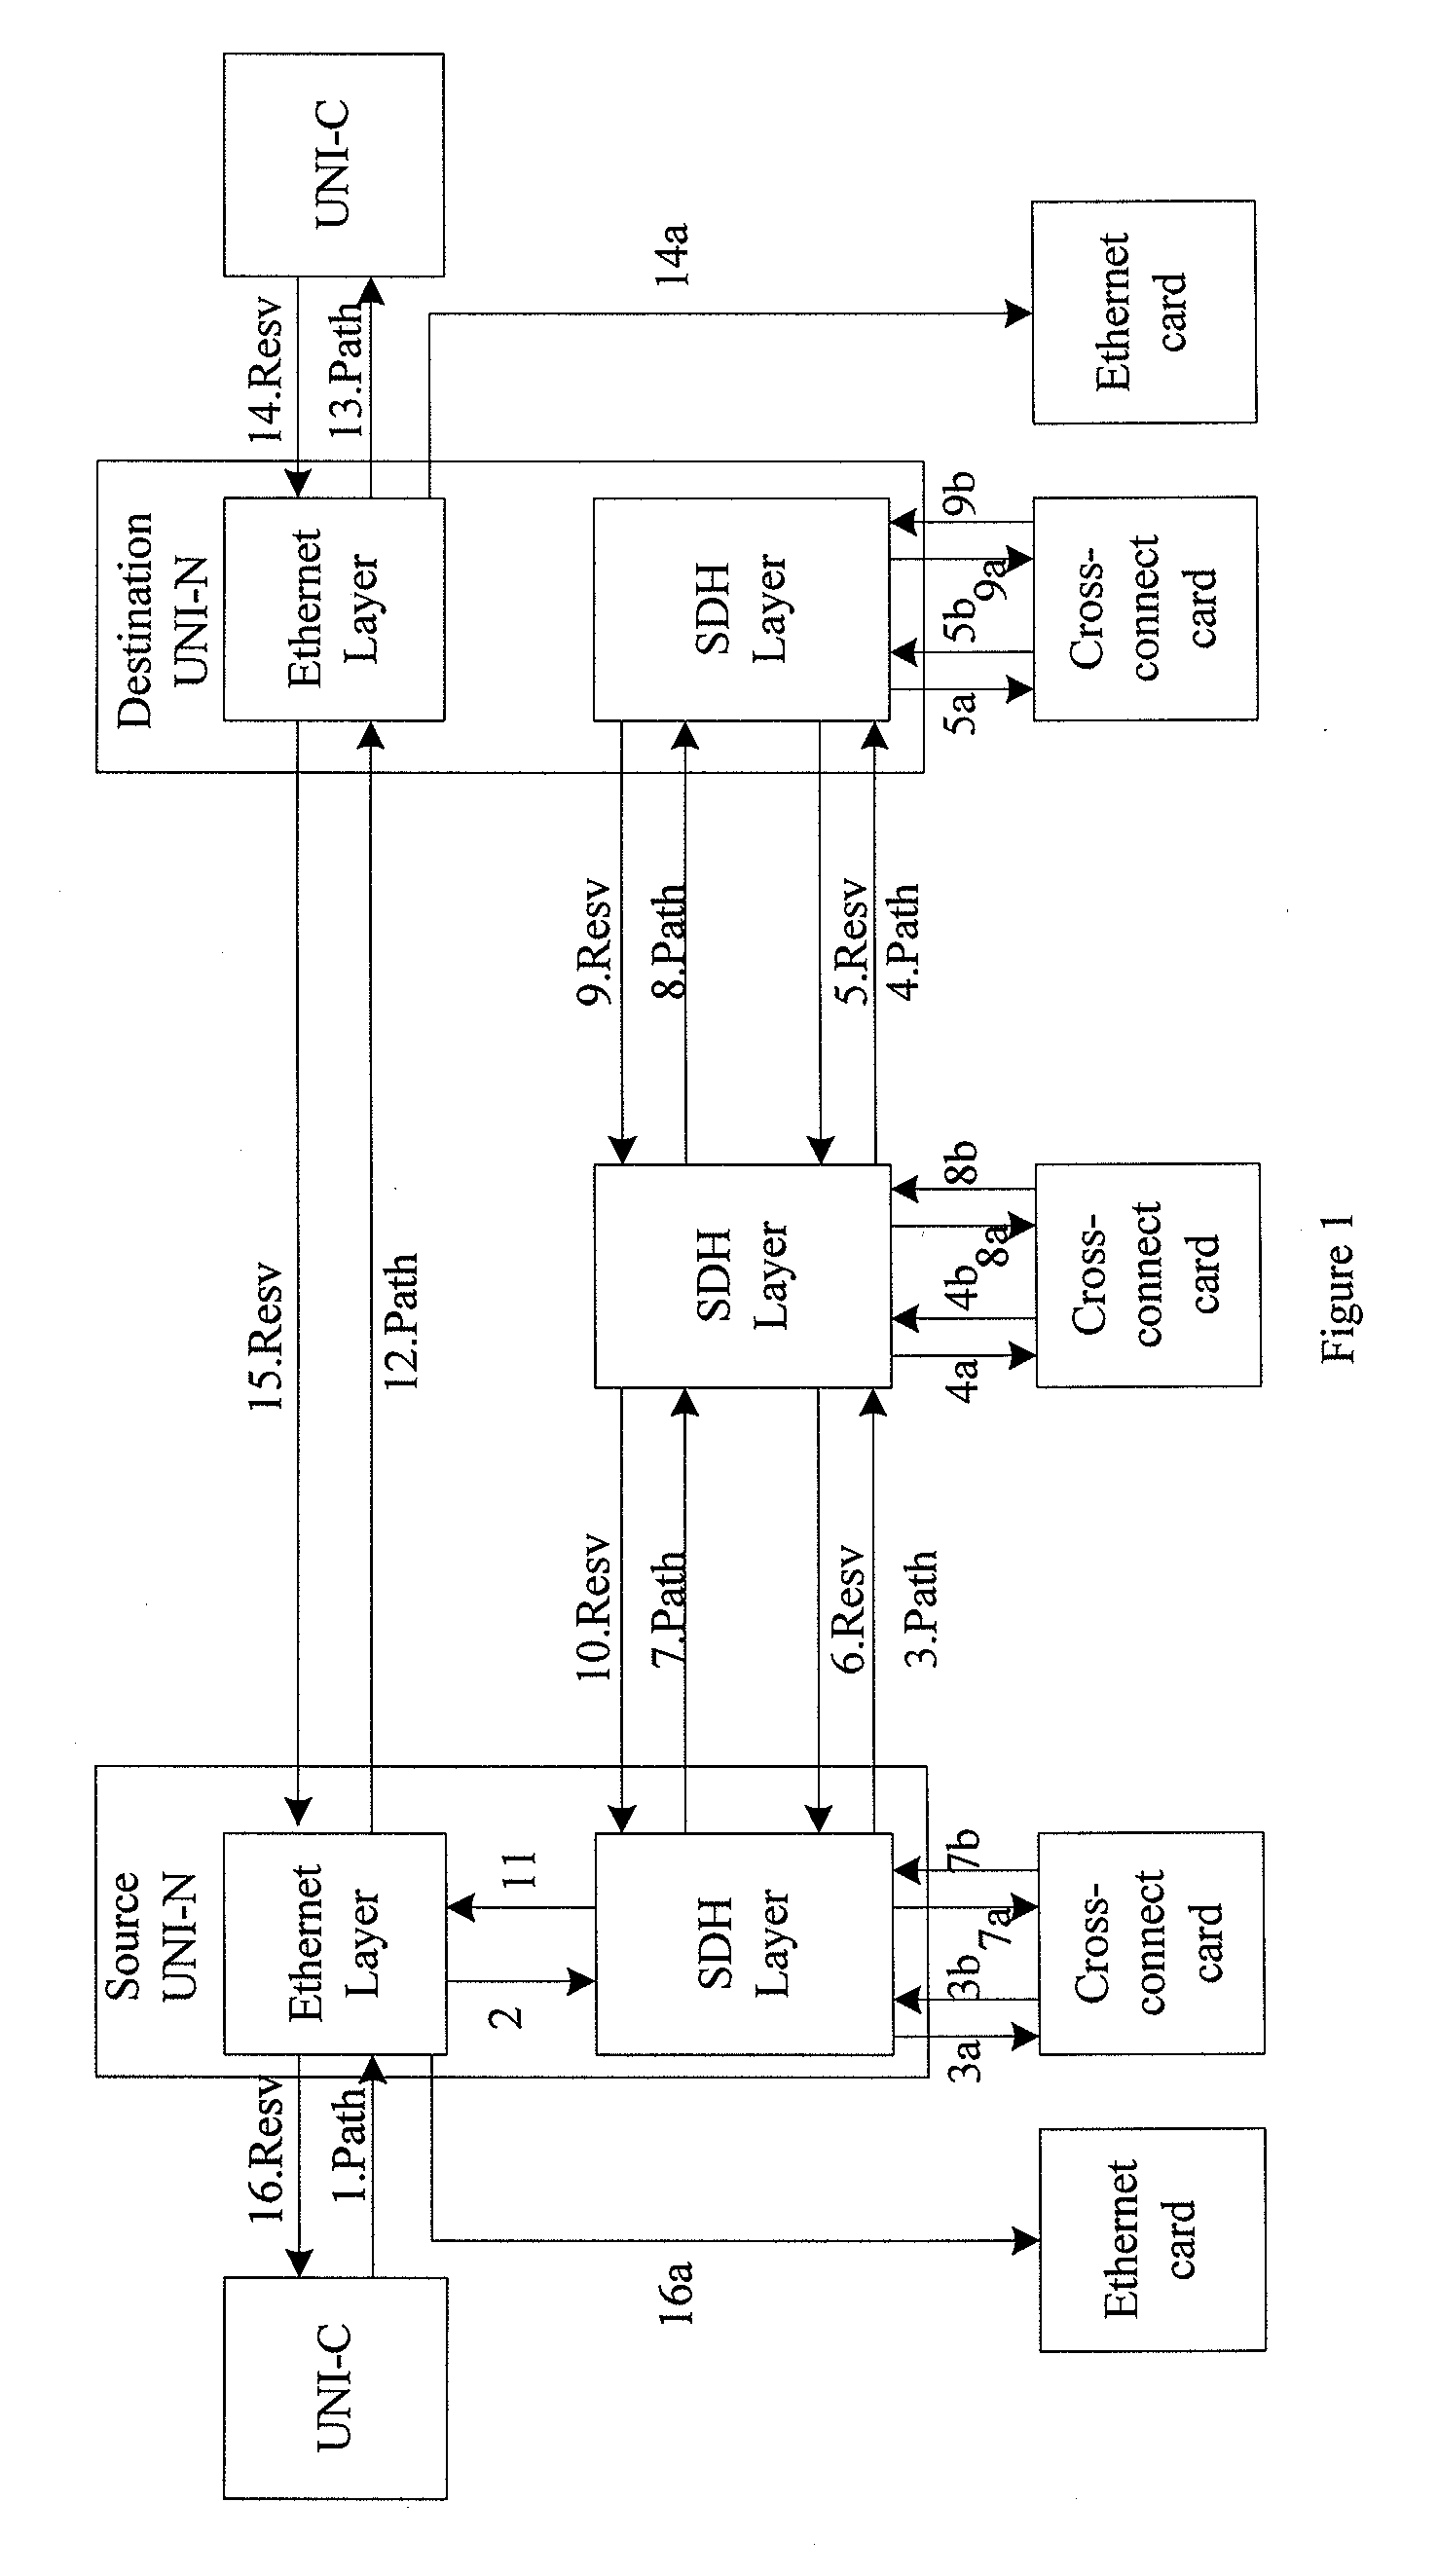 Method and apparatus for modifying bandwidth in bandwidth on demand services